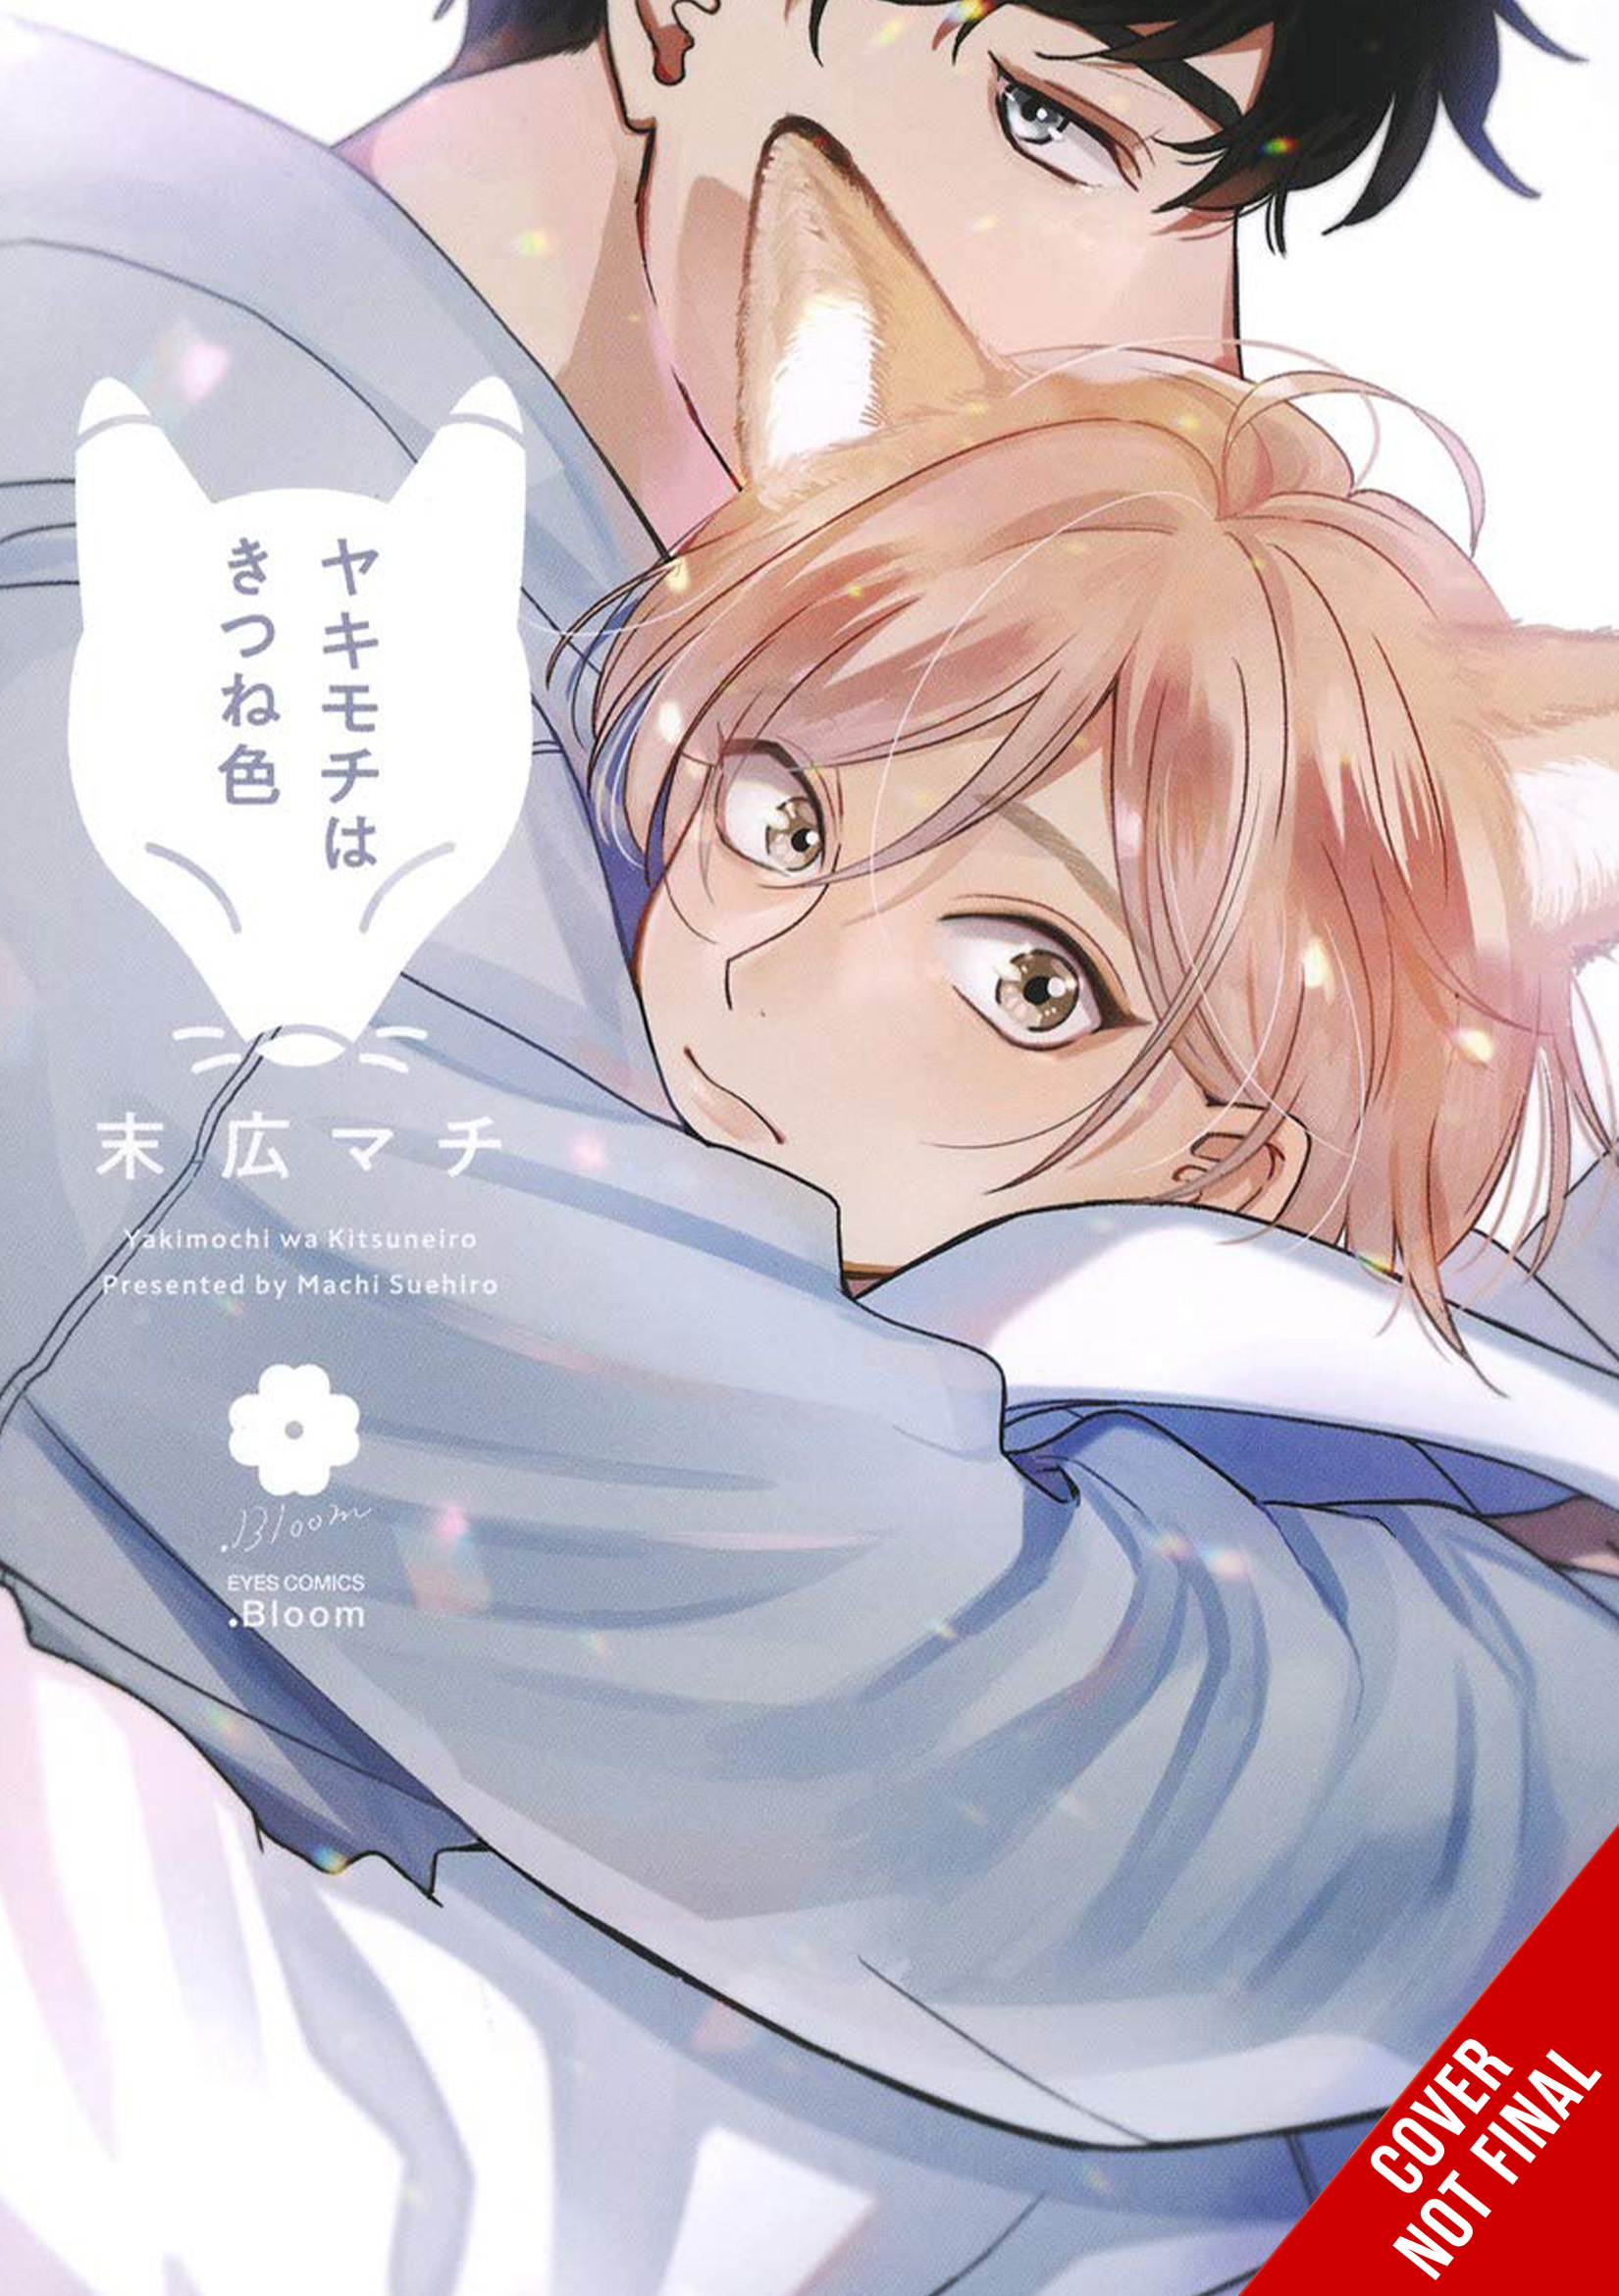 Yen Press Closes Out NYCC with Fifteen New Licenses 